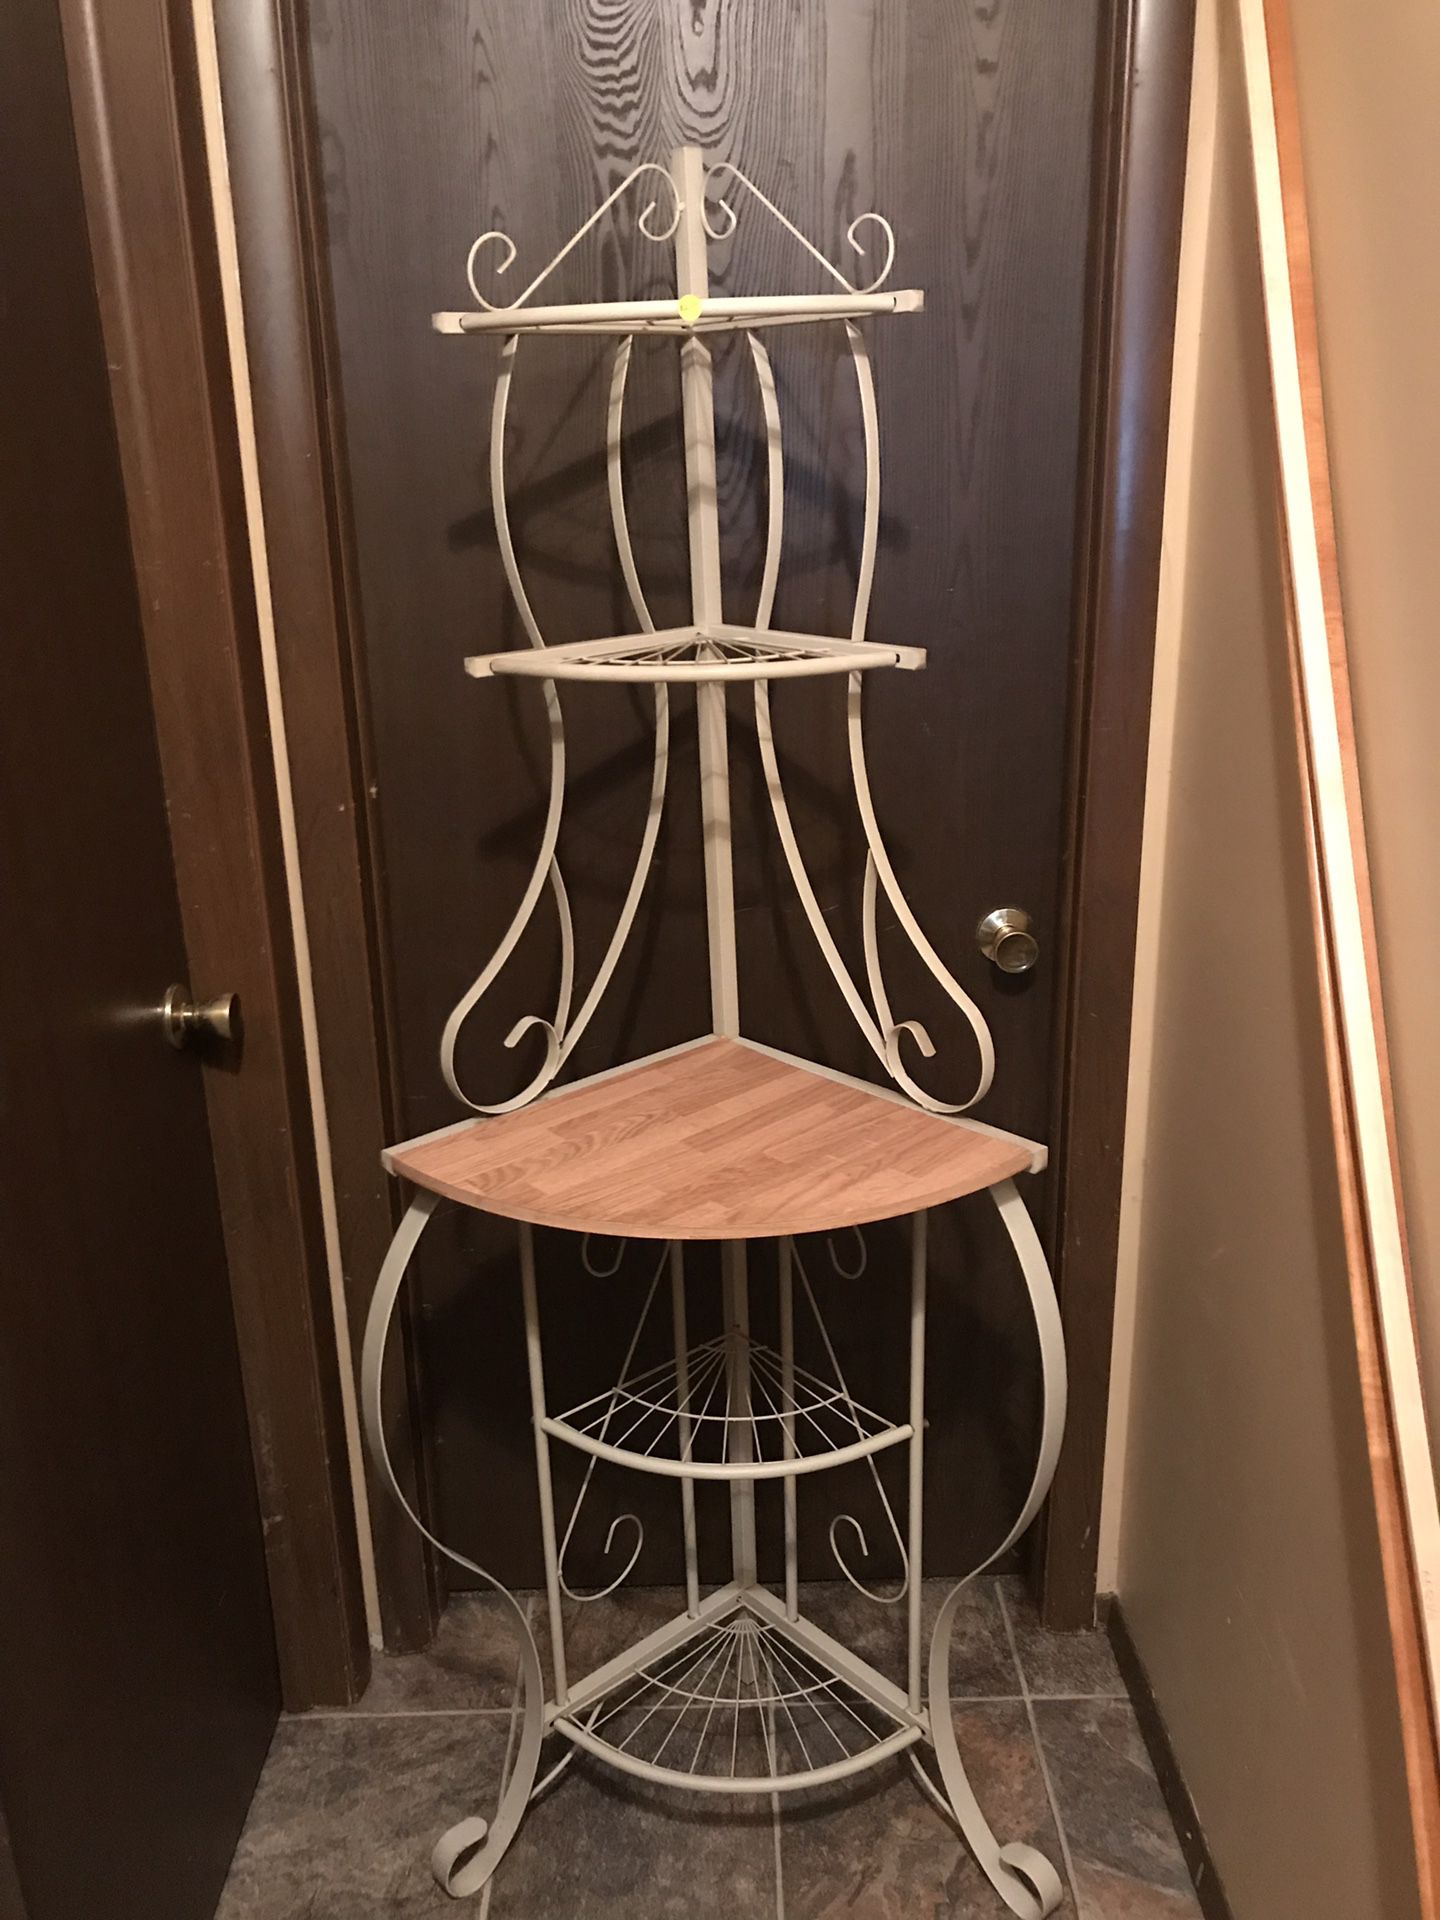 Corner stand. $20.00 wine rack stand. $40.00. Both for $55.00